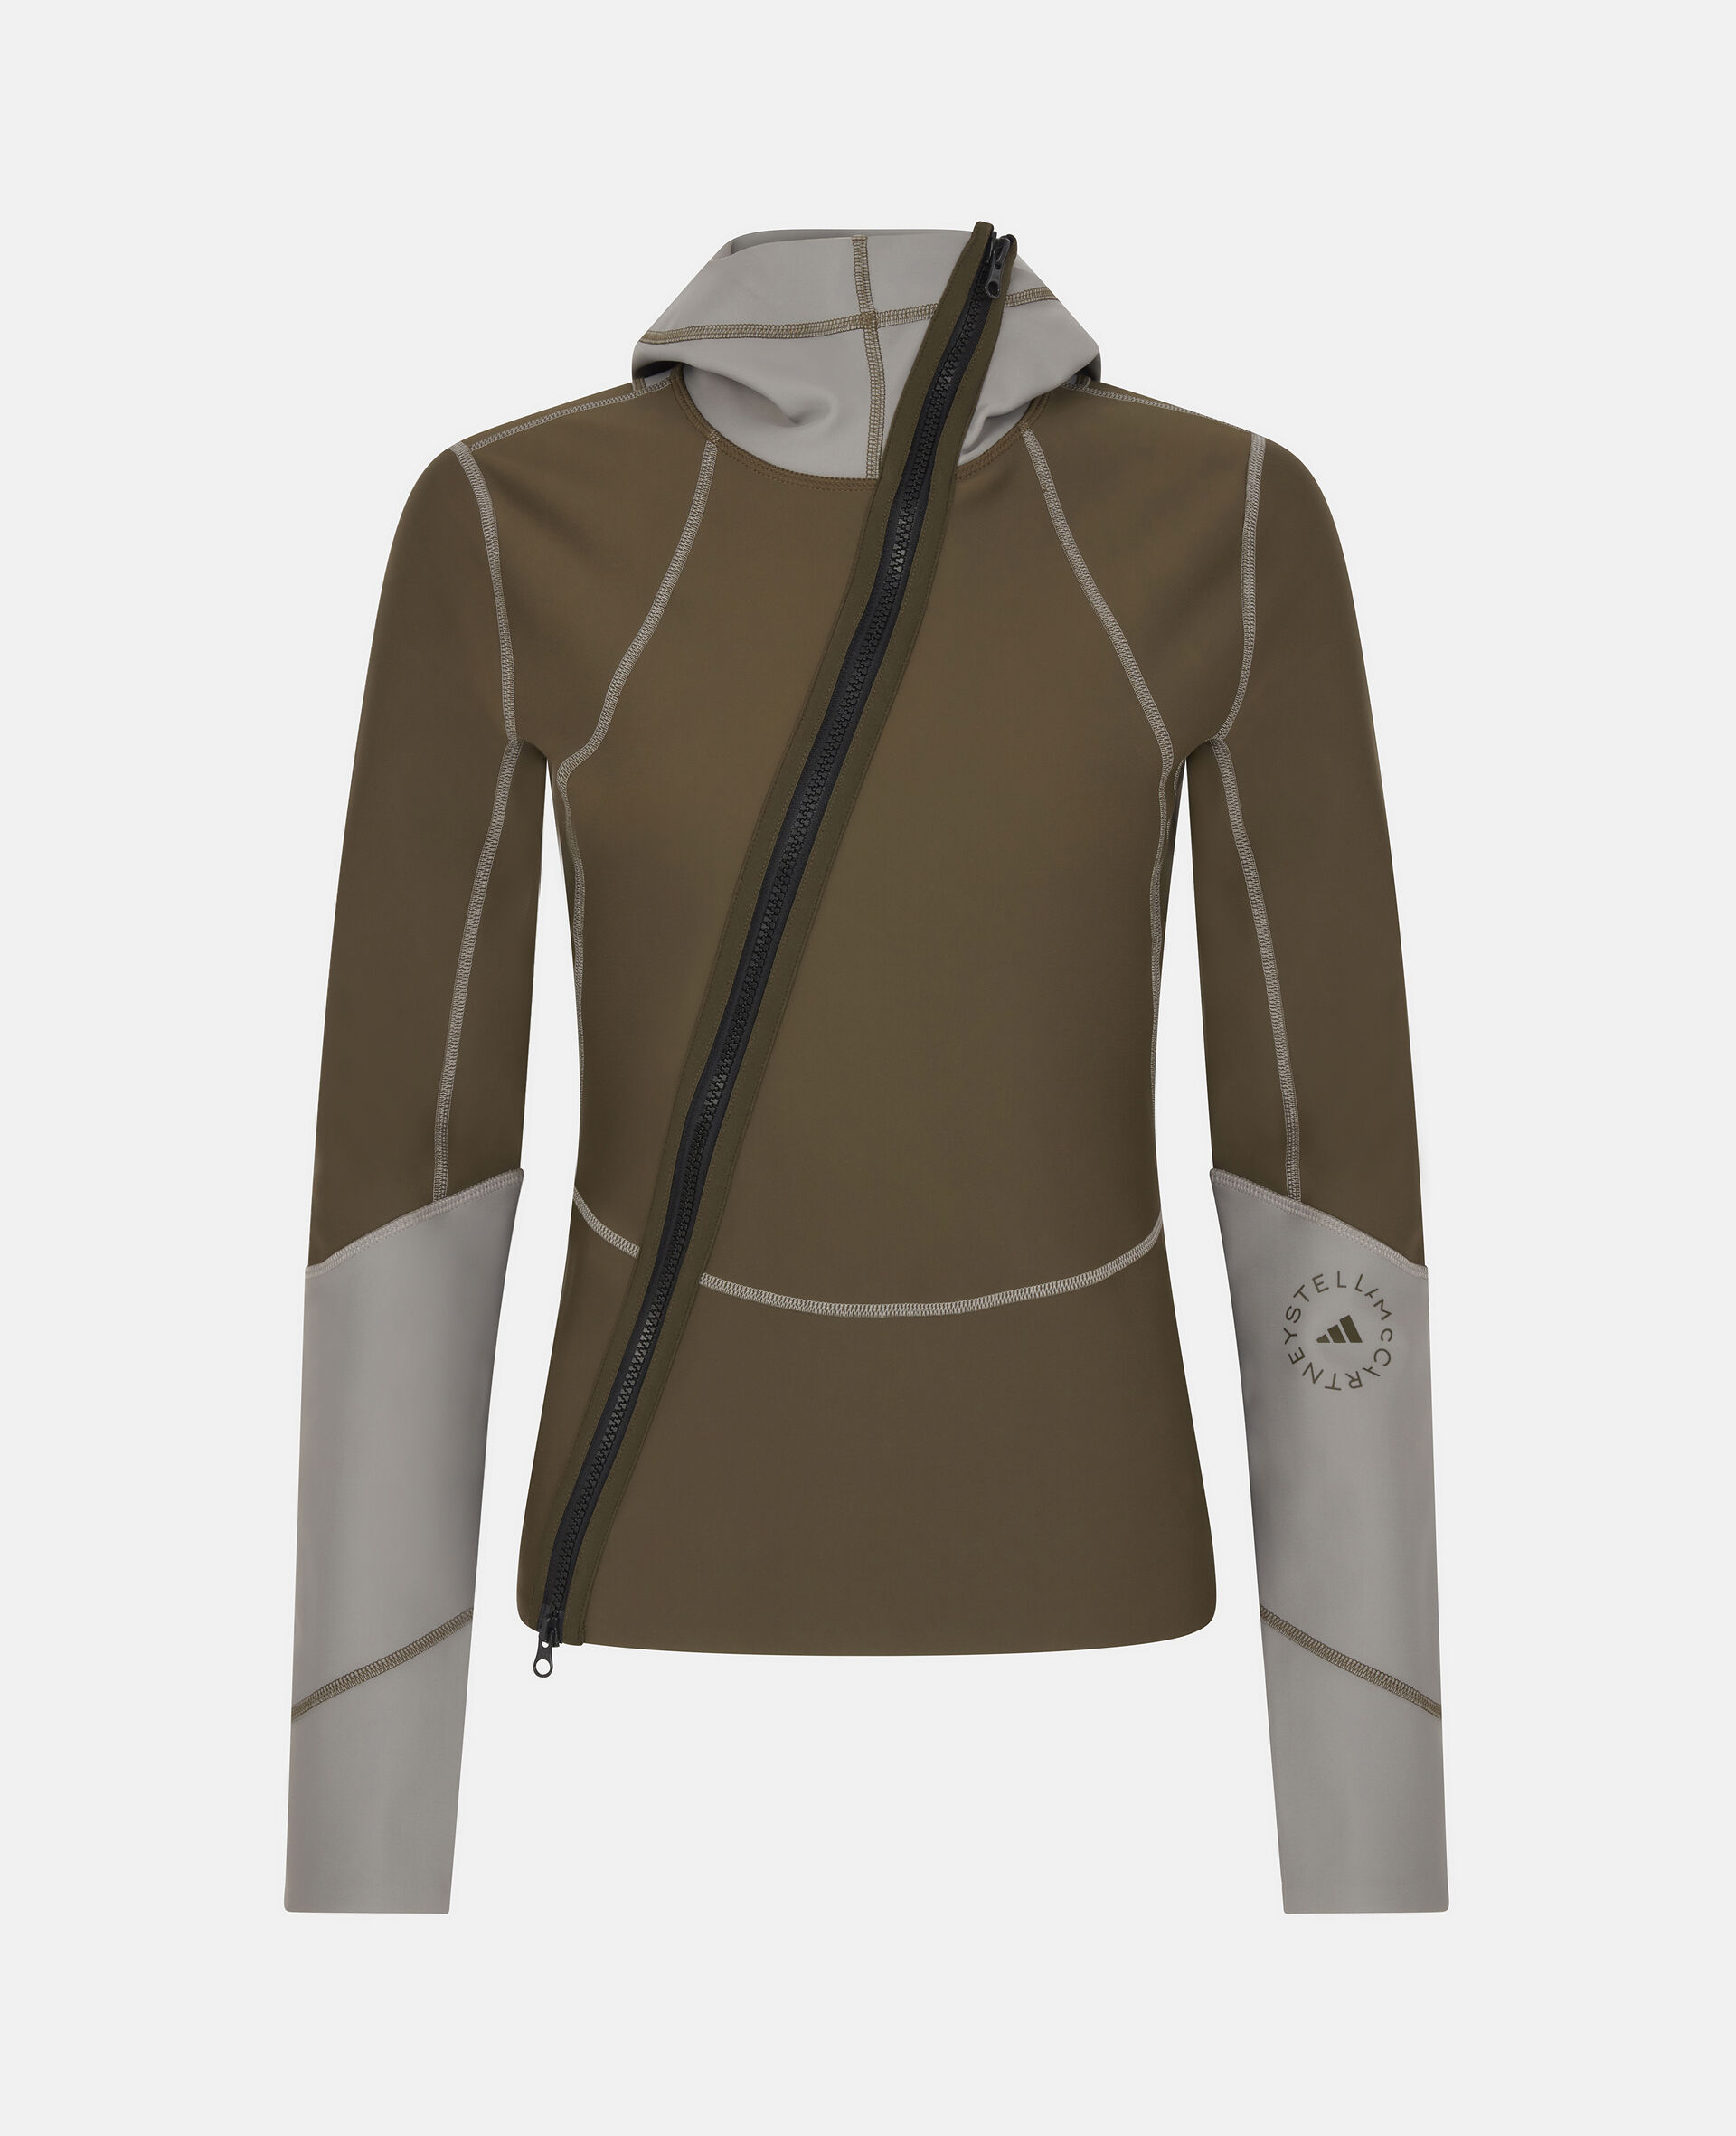 Dark Khaki and Dove Grey Earth Protector Track Top-Multicolour-large image number 0